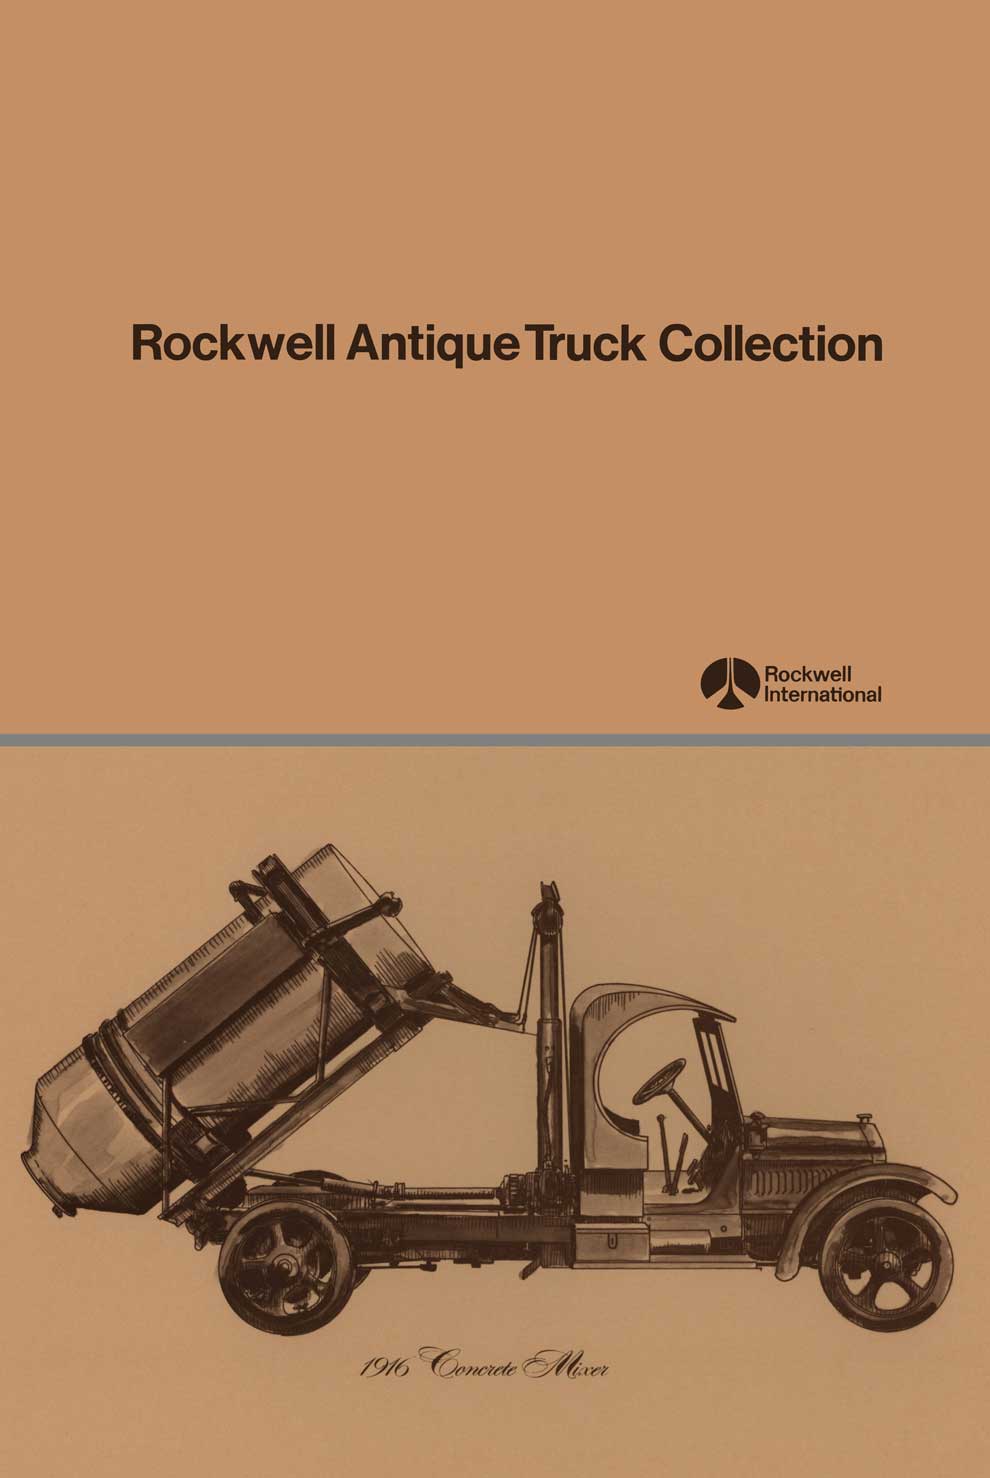 Truck Collection Antique Circa 1915 - 1924 - Rockwell